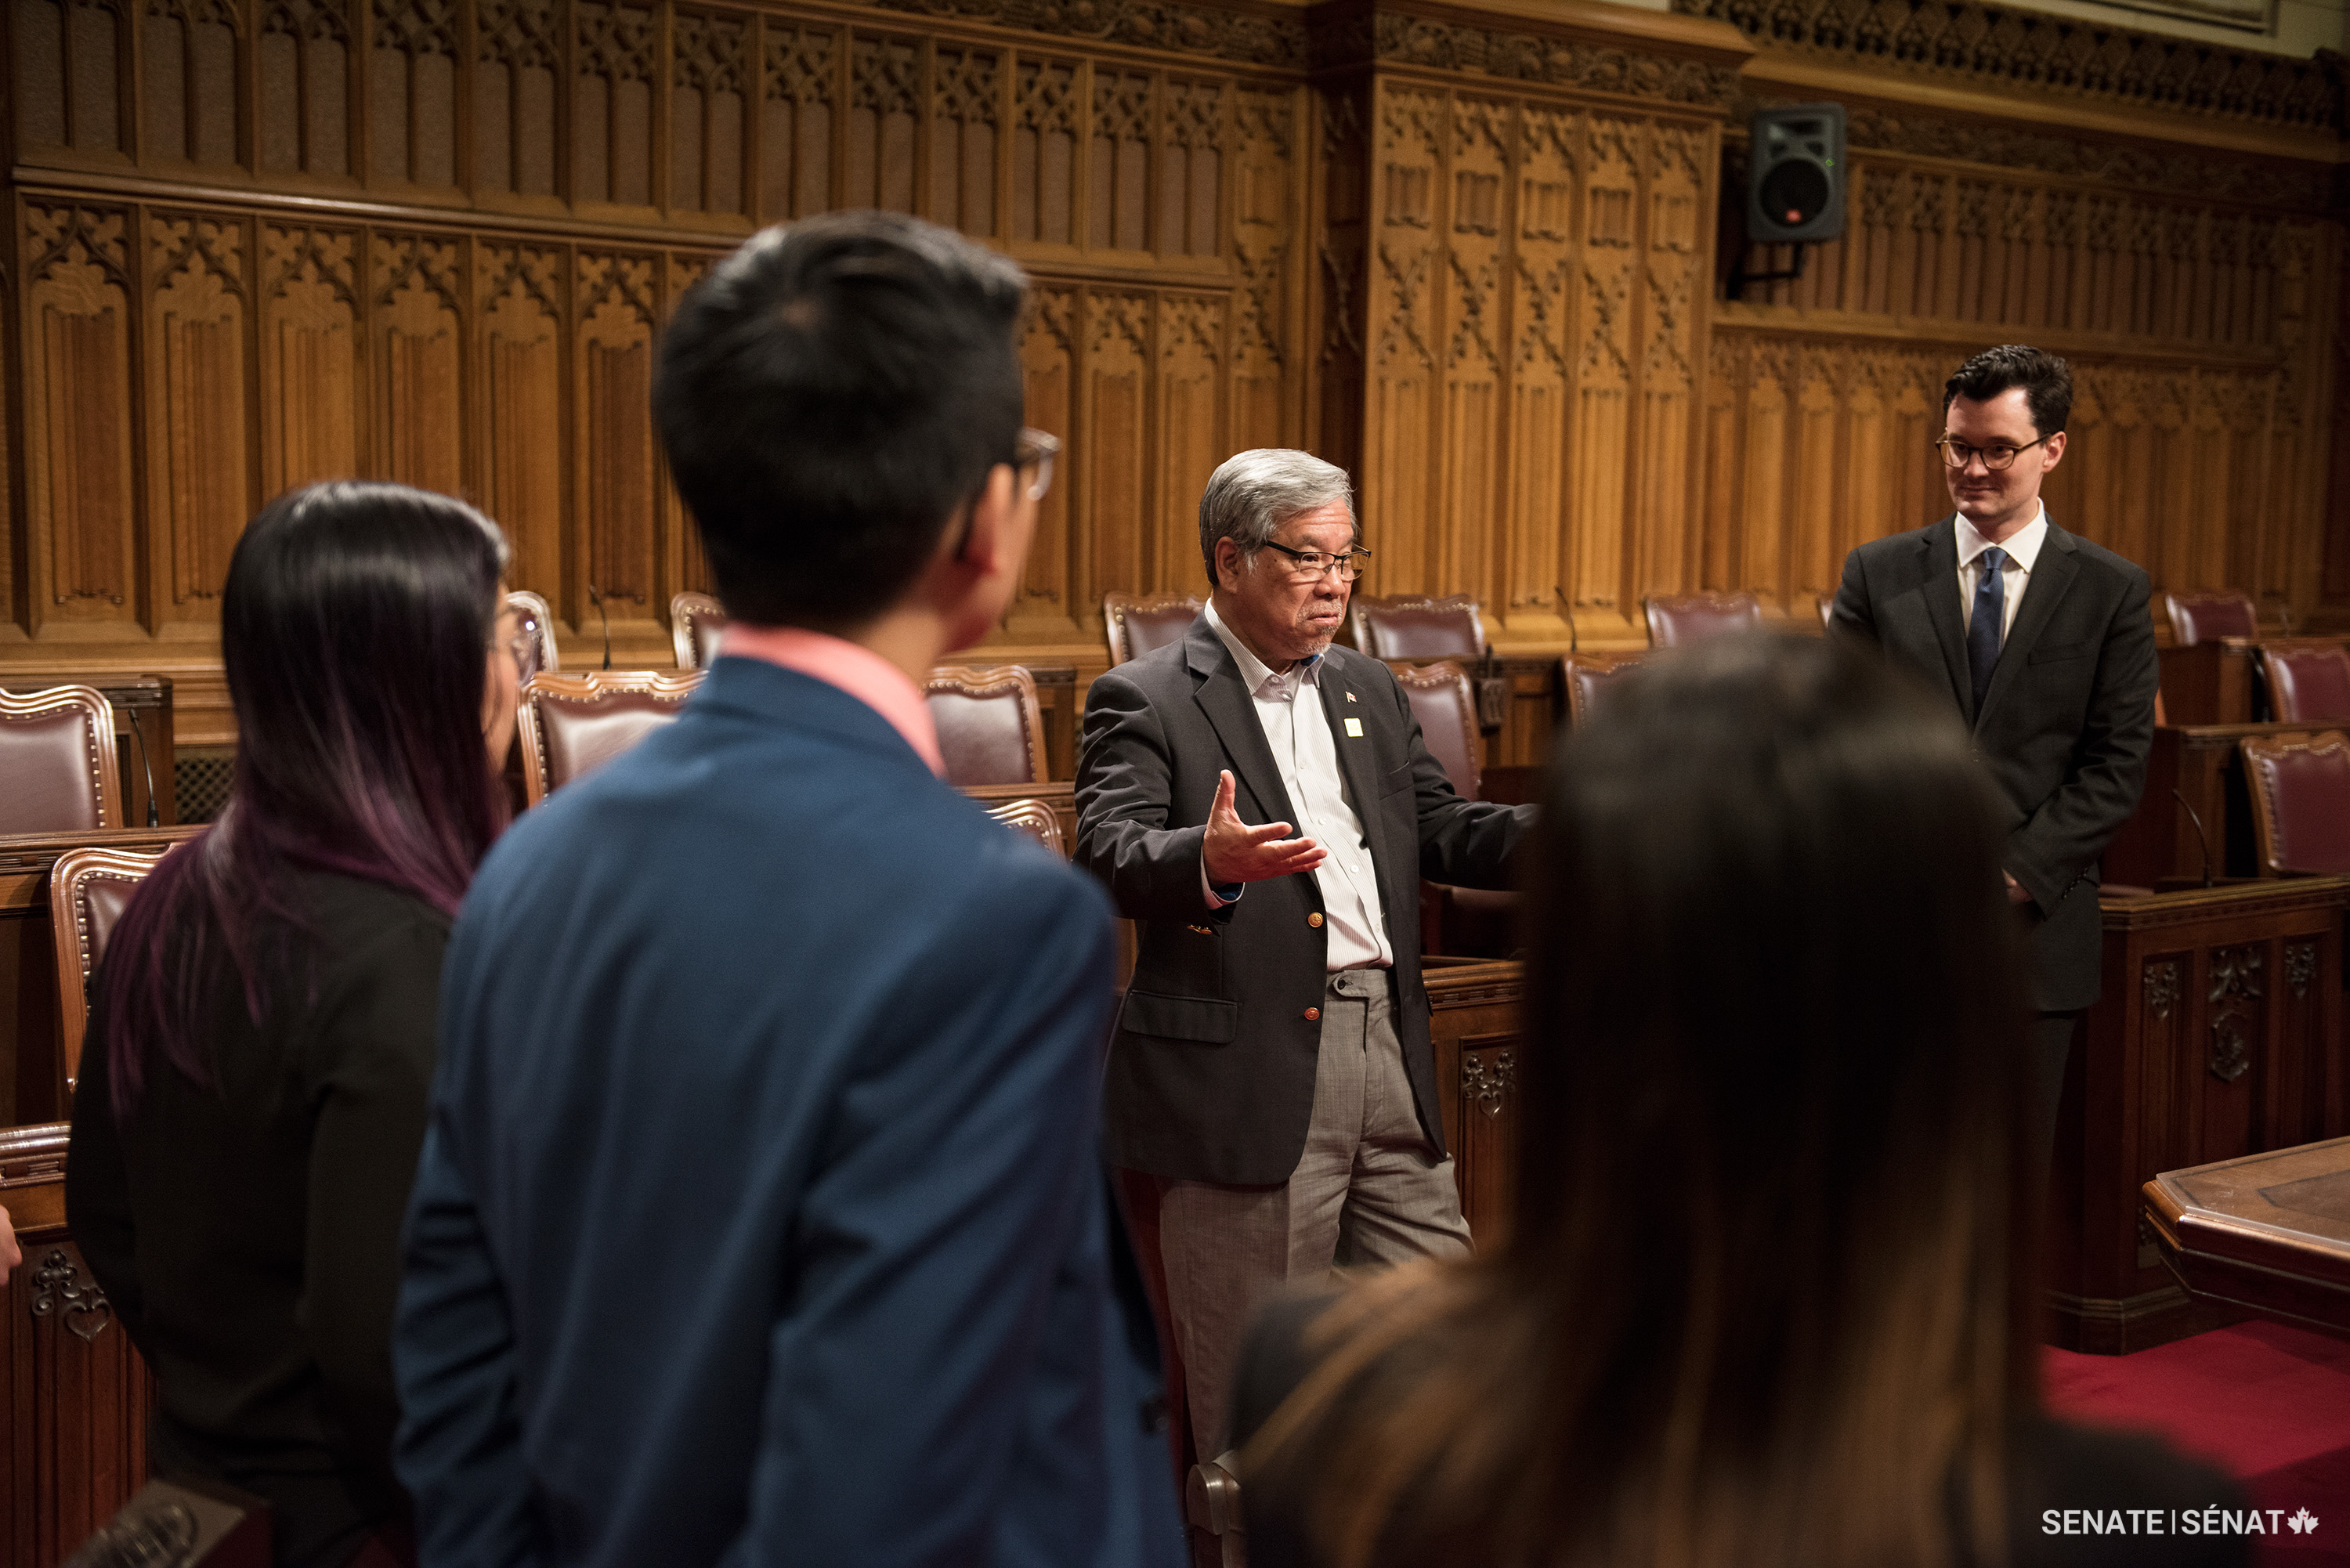 Senator Ngo, centre, explains aspects of the Senate to his interns on the floor of the Red Chamber in Centre Block — now closed for rehabilitation — in this 2017 photo. Senator Ngo offered an annual summer internship to Canadian post-secondary students from Vietnamese communities so they could learn about human rights issues and gain practical work experience.